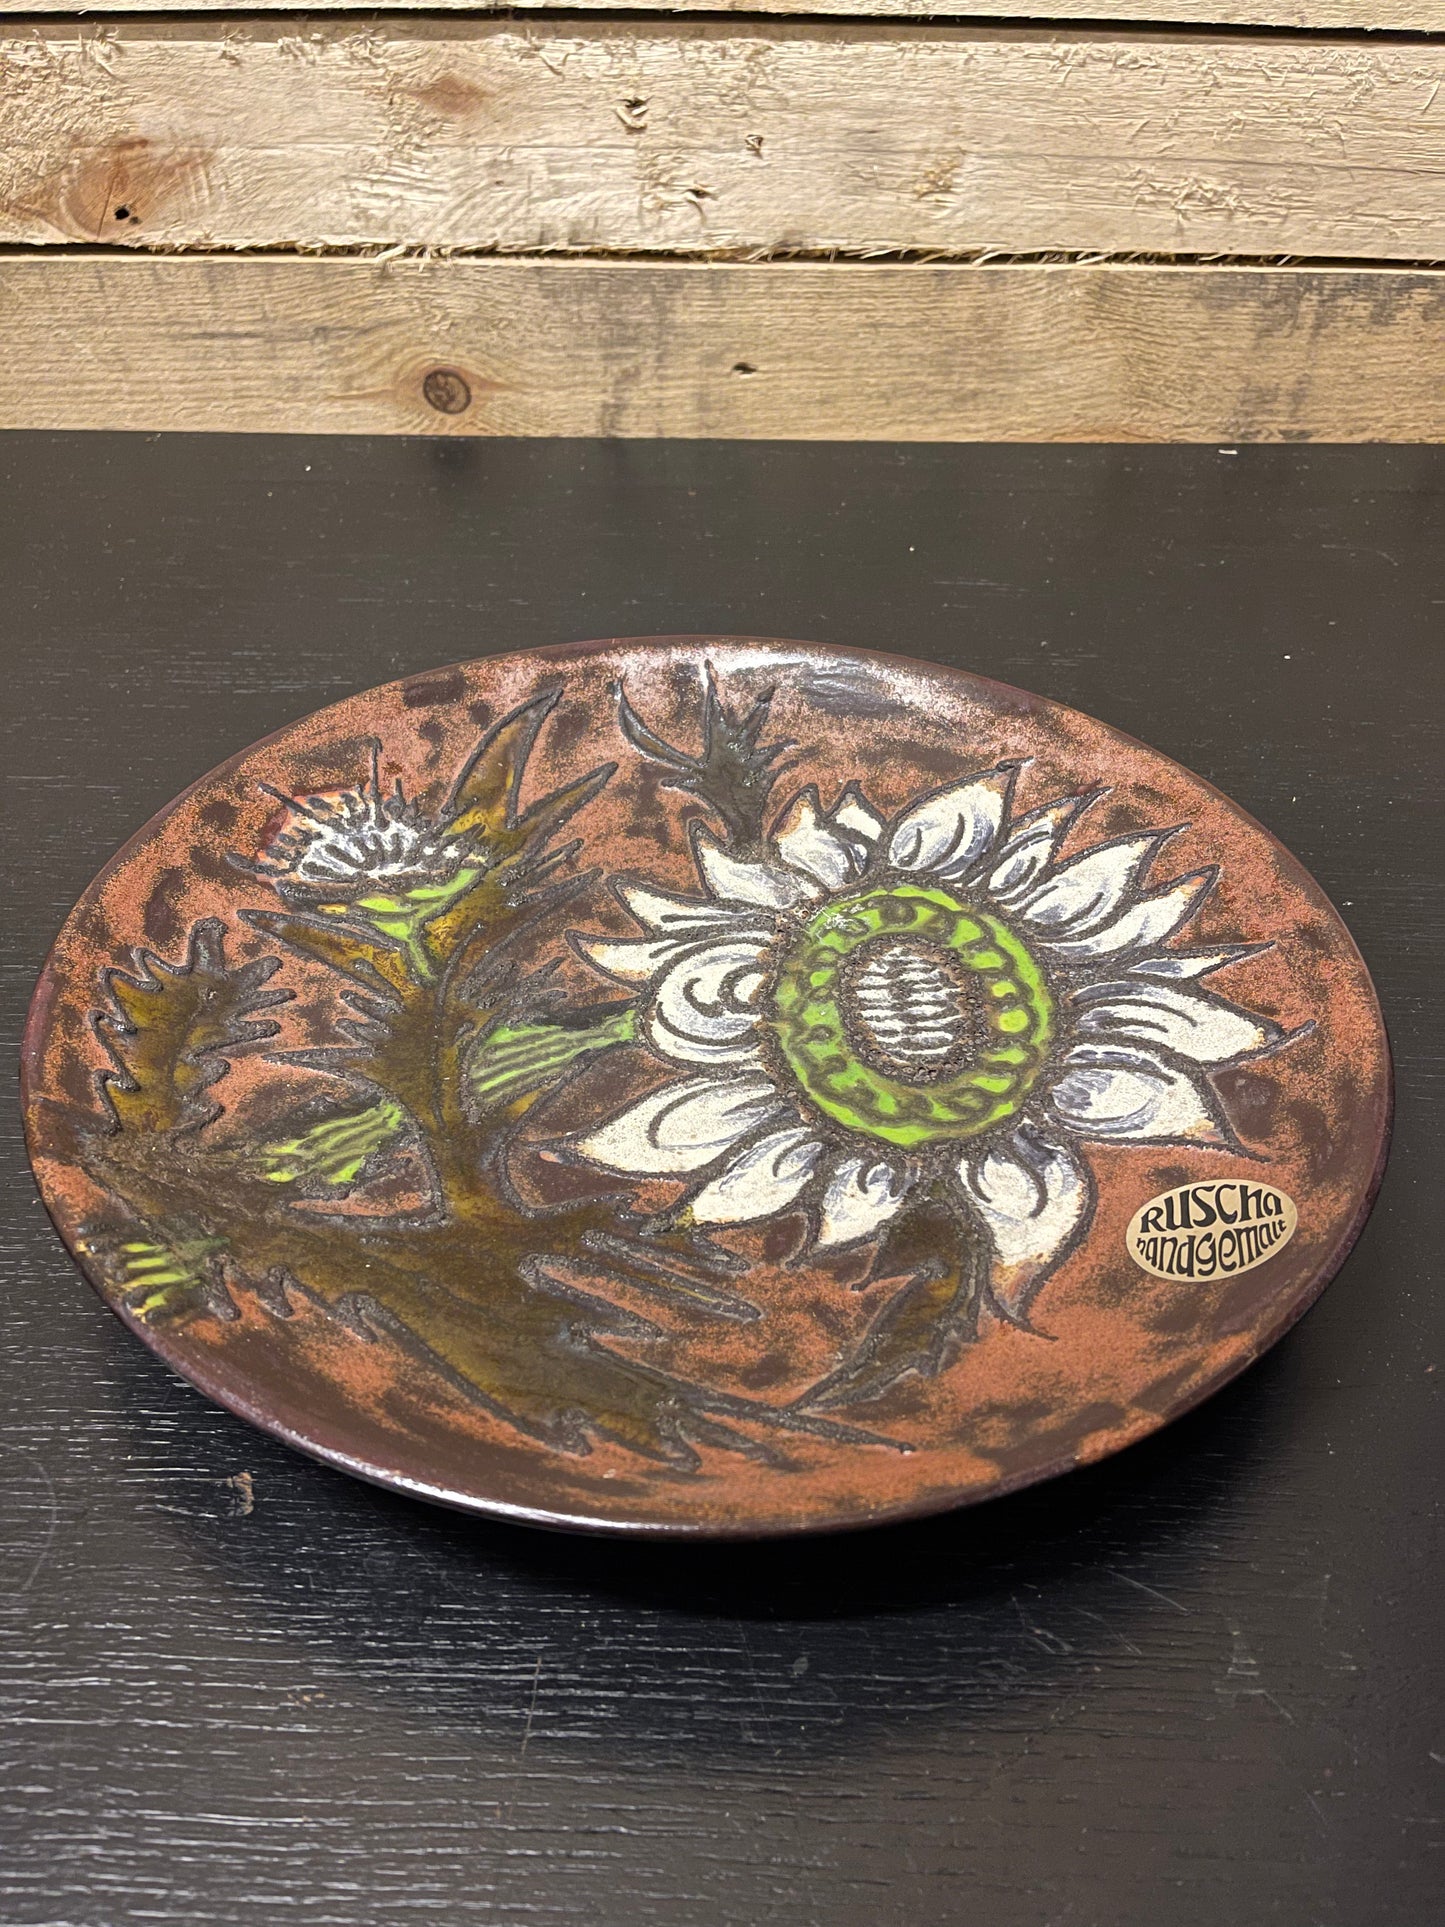 Large 1960s West German Pottery Fat Lava Ceramic Plate By Ruscha Art